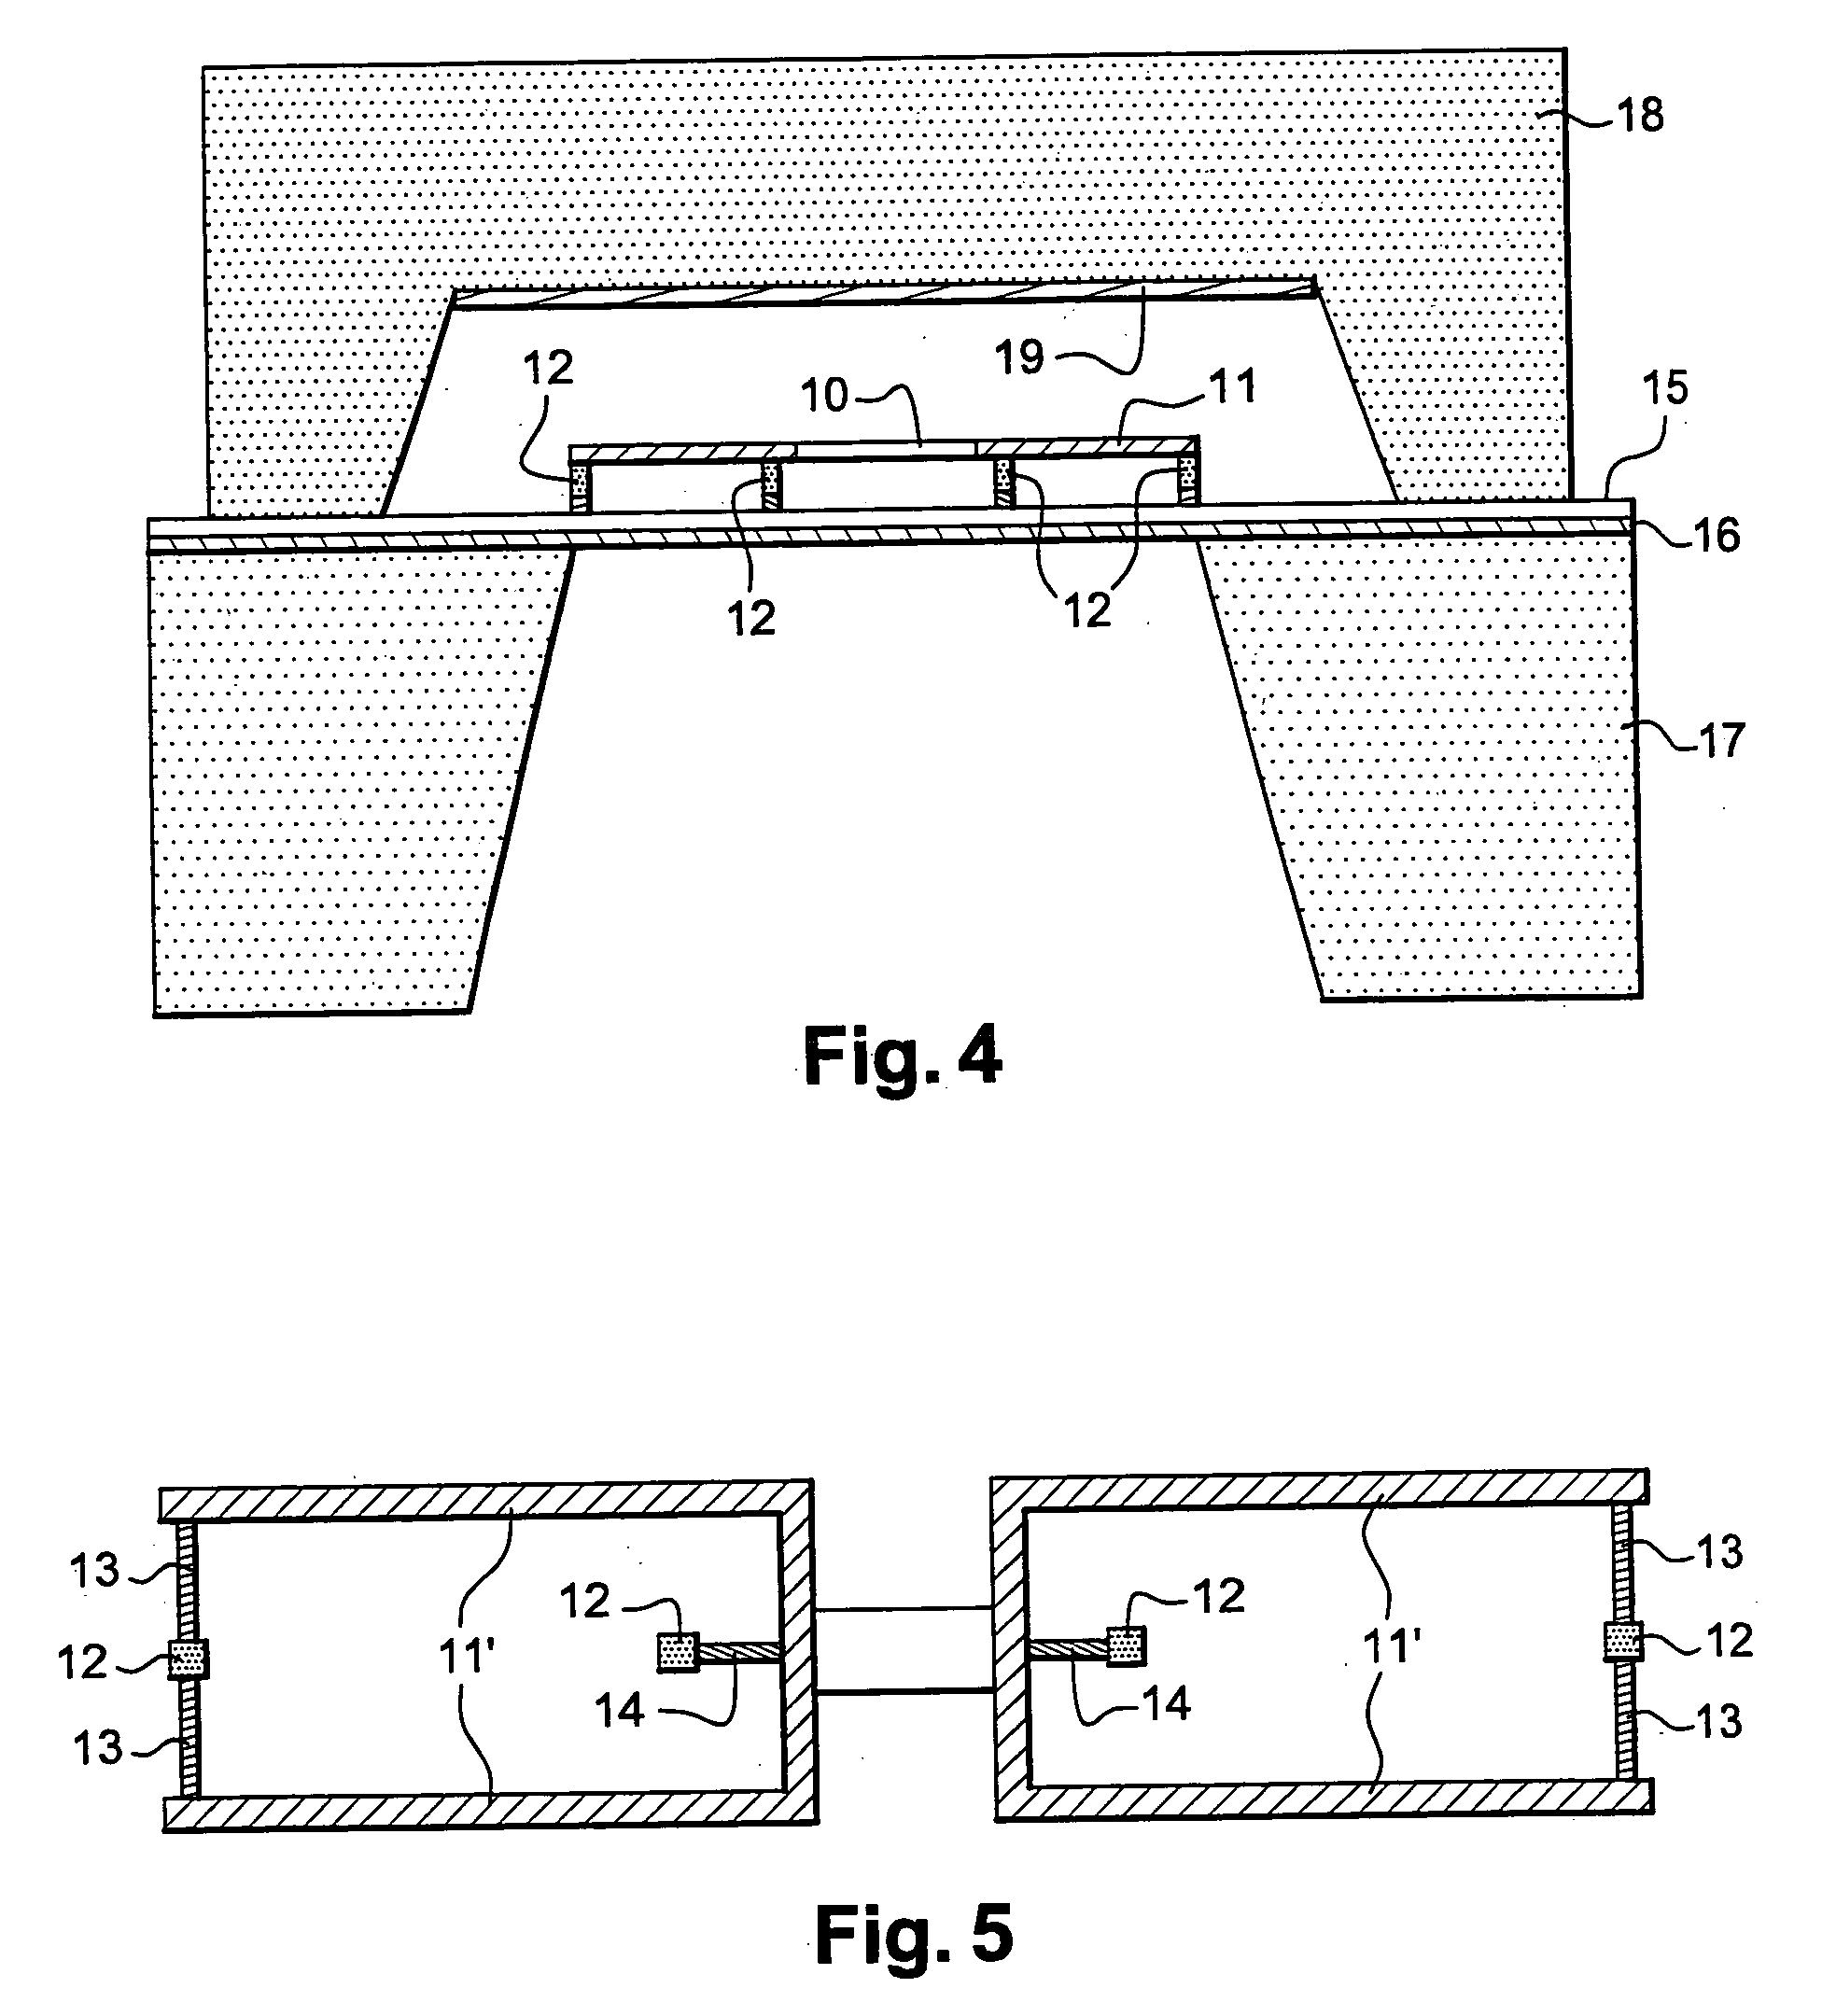 Bolometric detector, device for detecting submillimetric and millimetric electromagnetic waves that uses such a detector